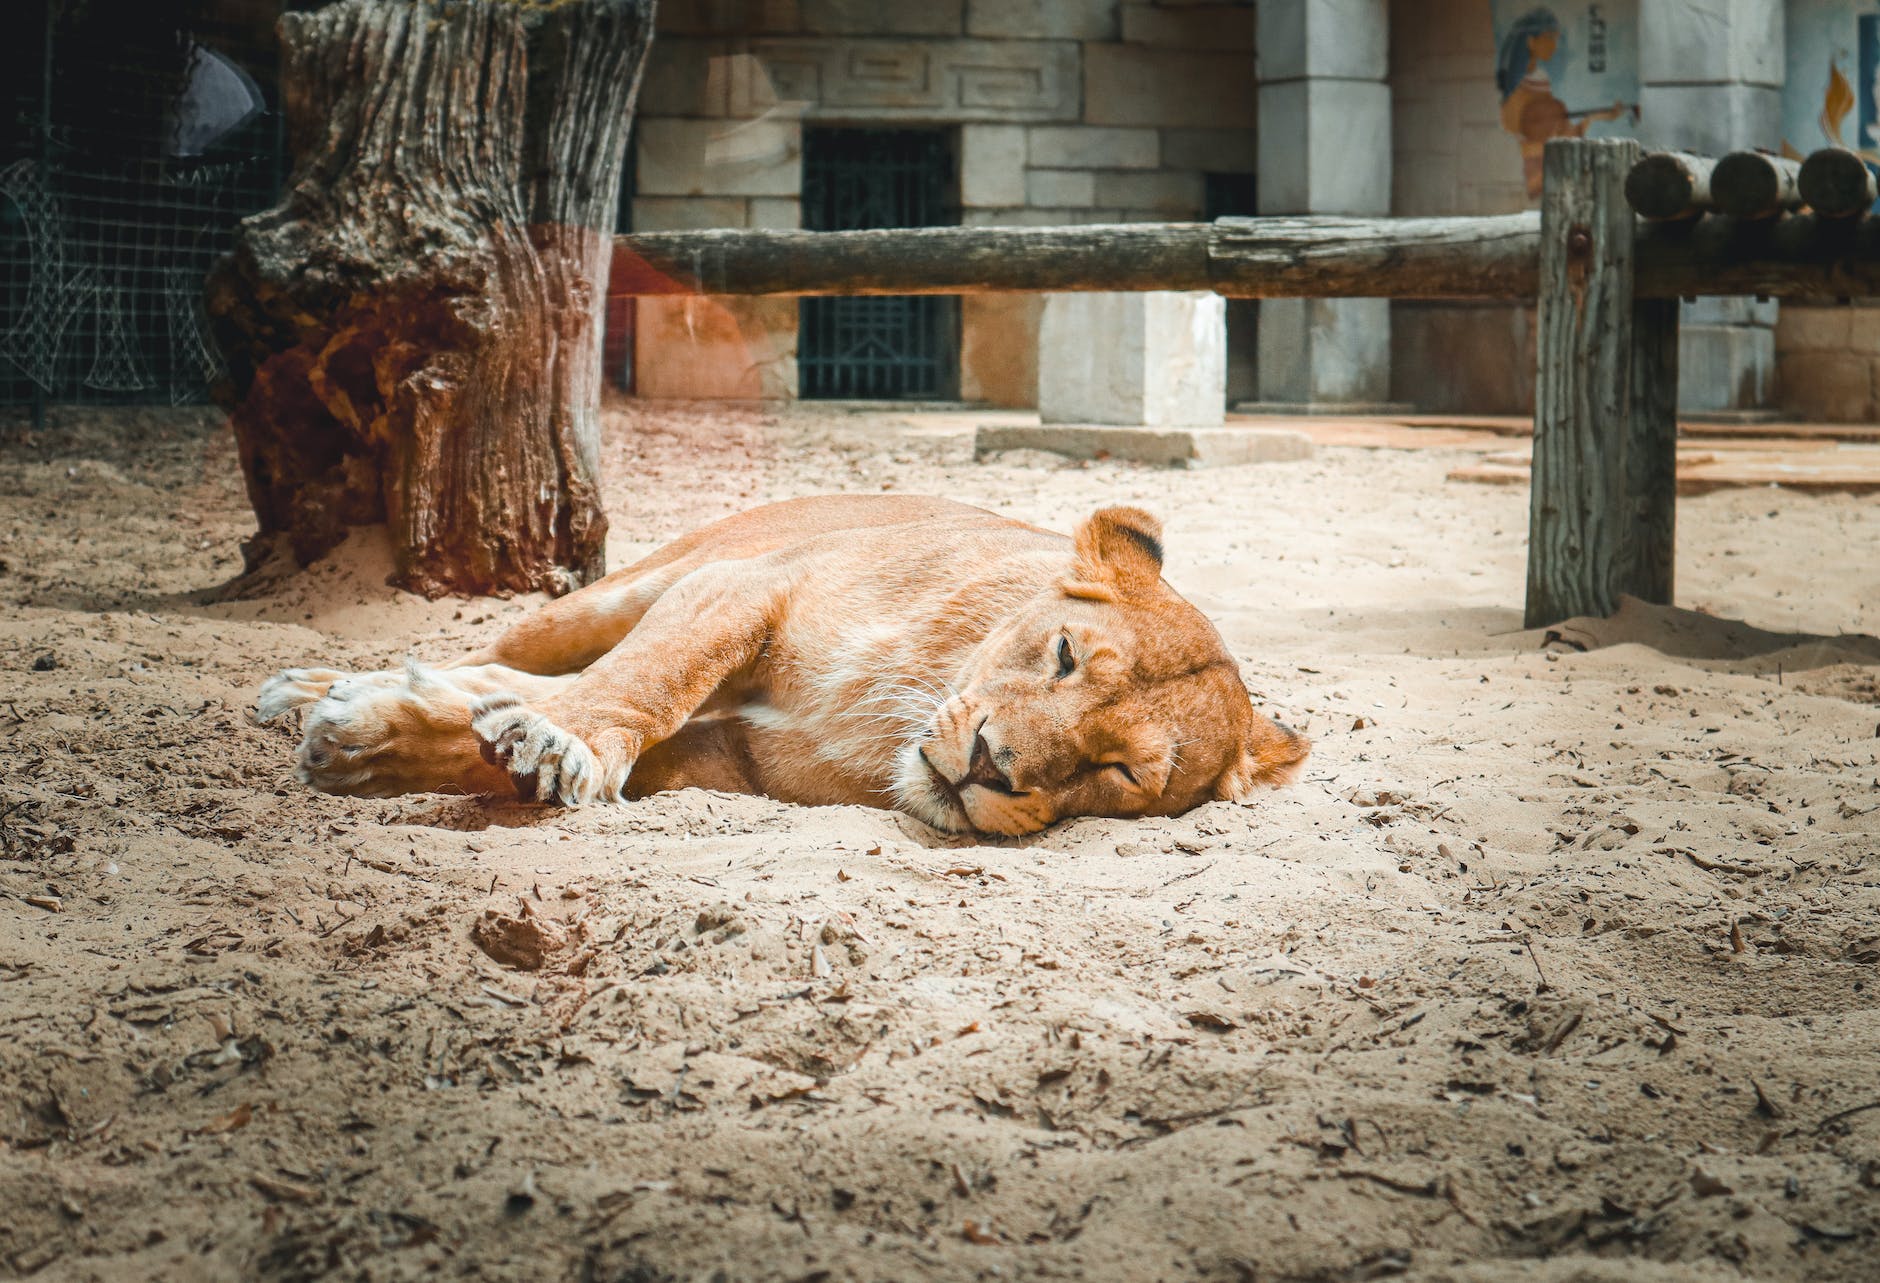 lioness sleeping on the sand in the zoo enclosure